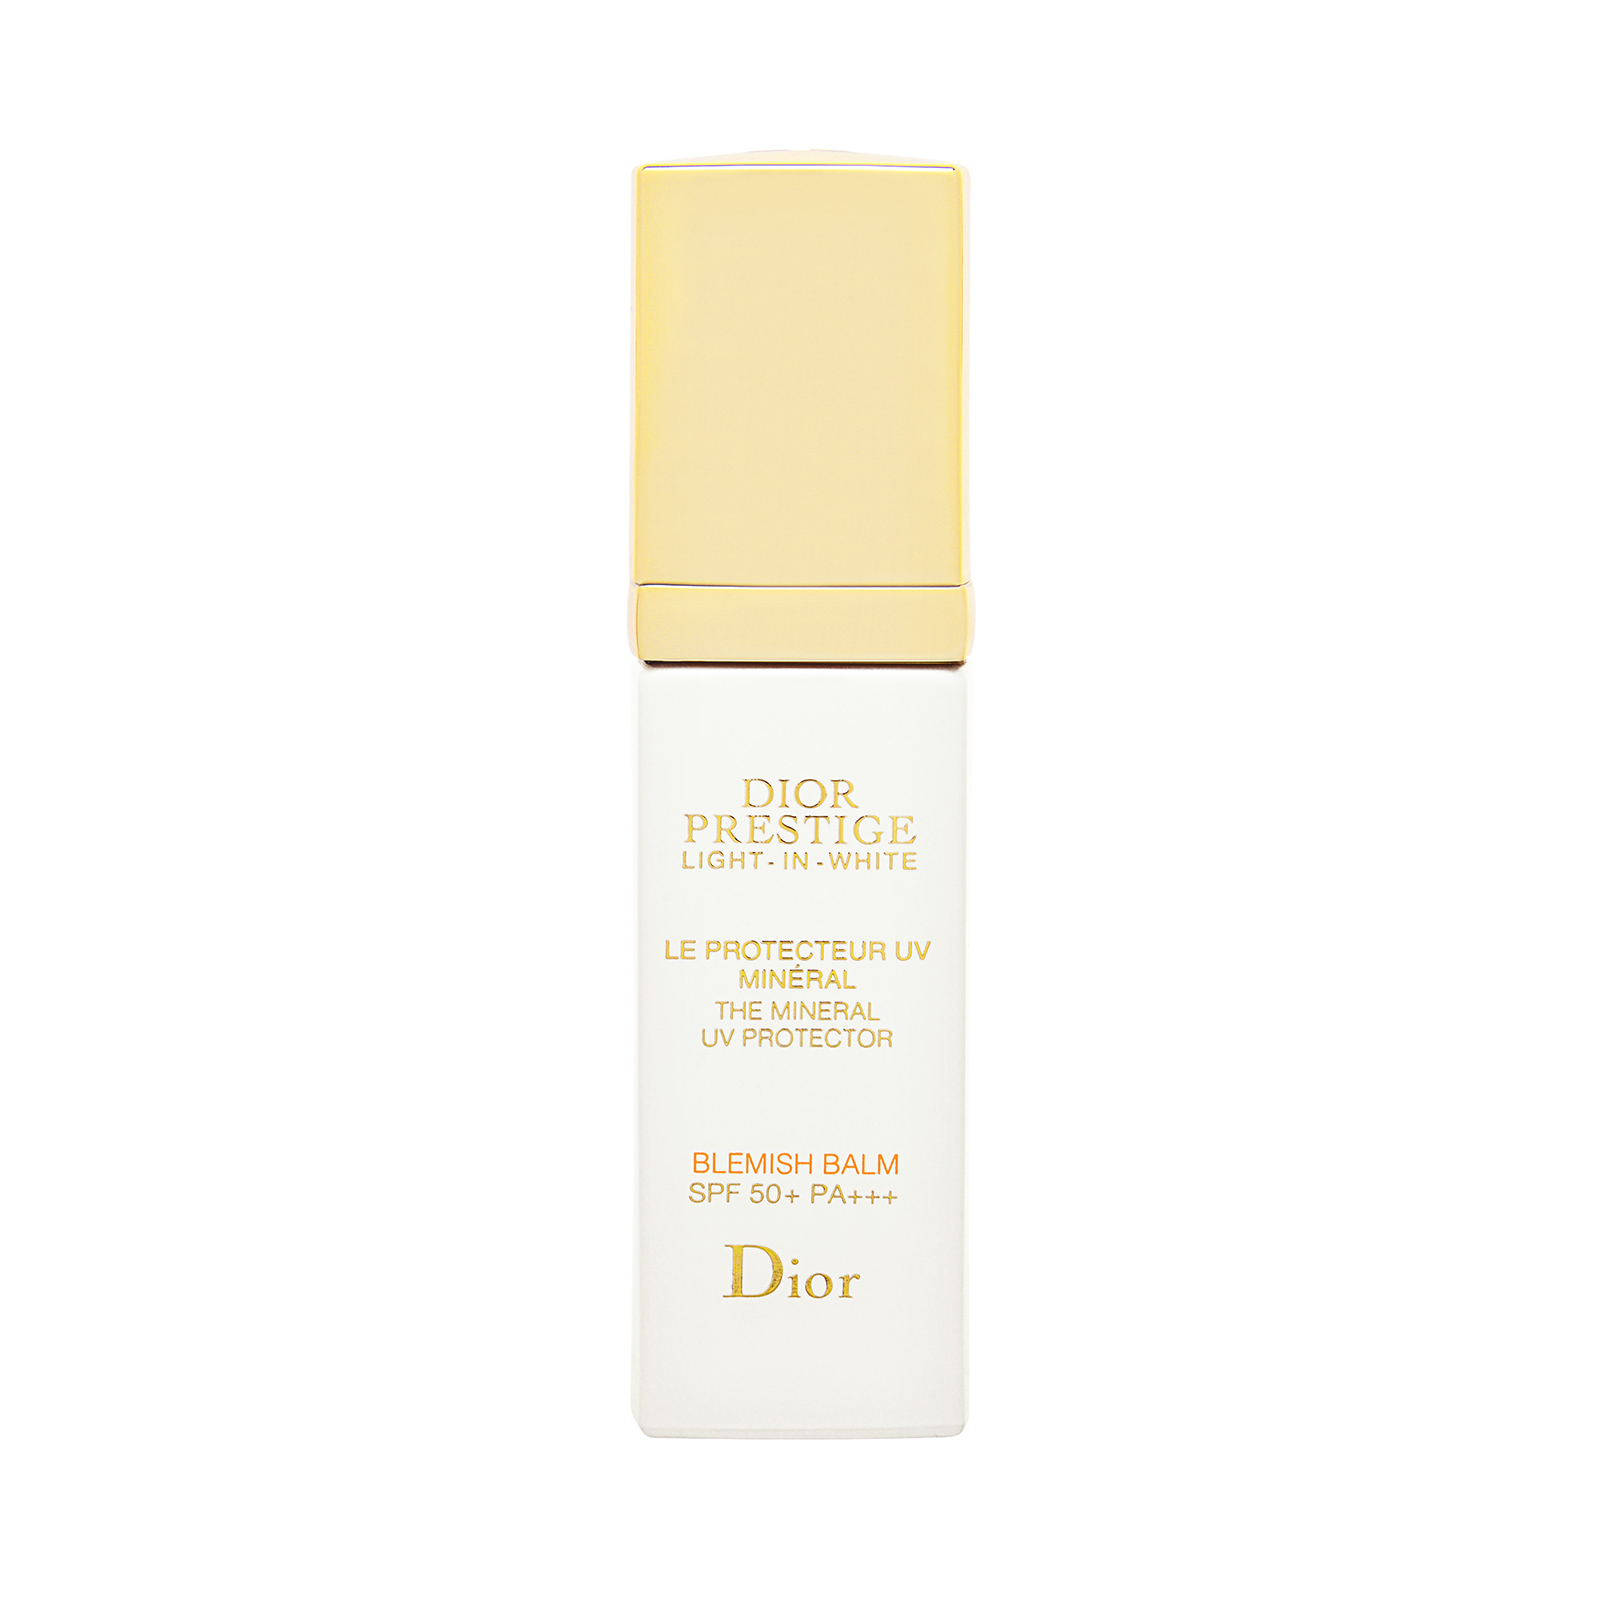 Askmewhats Dior Prestige Light In White Review